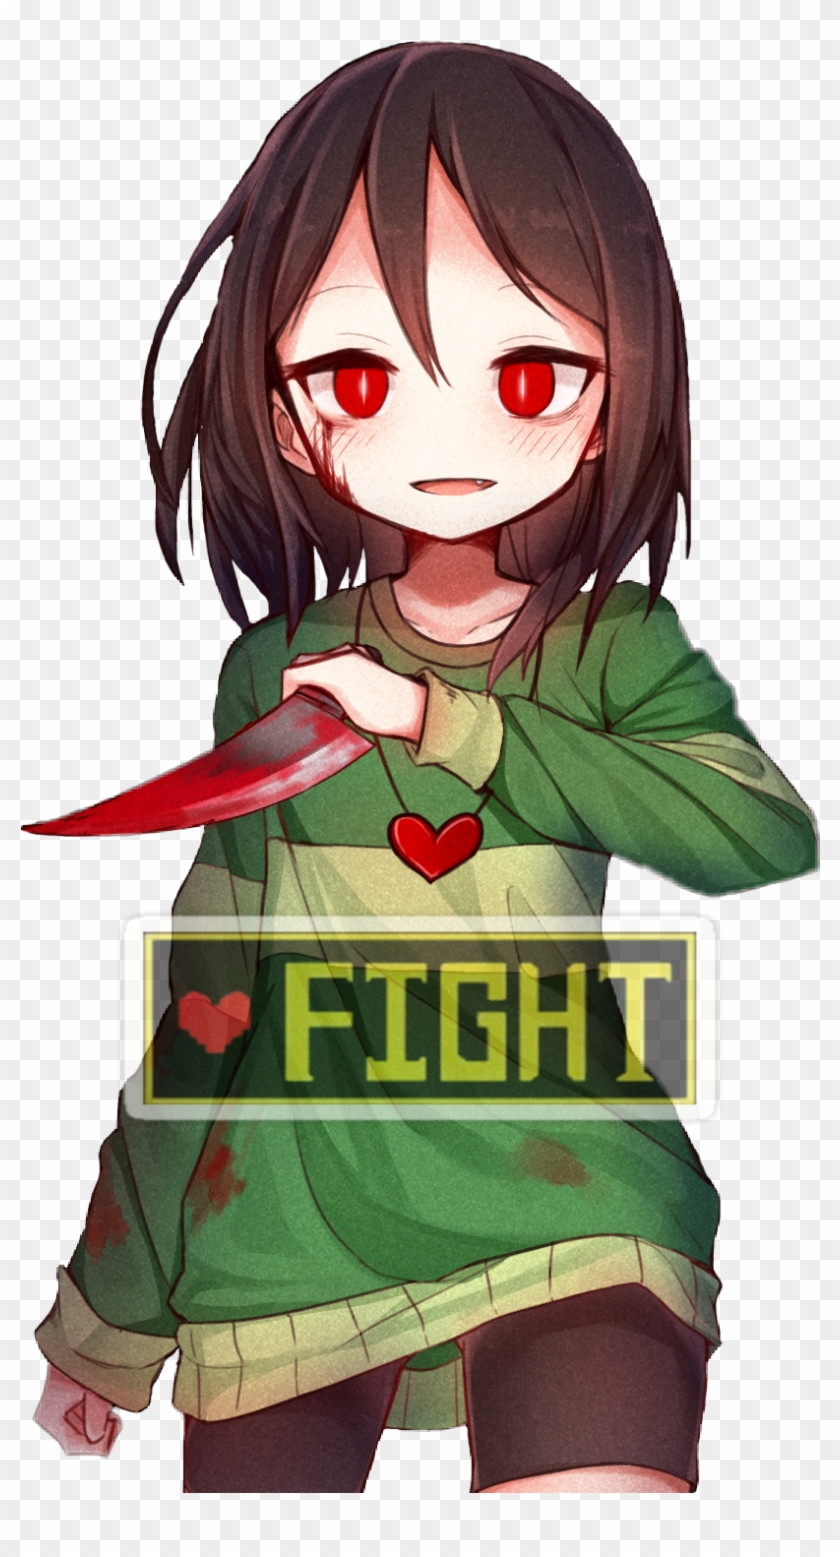 Undertale Chara Fight Genocide Frisk And Chara Hd Png Download 813x1477 Pngfind